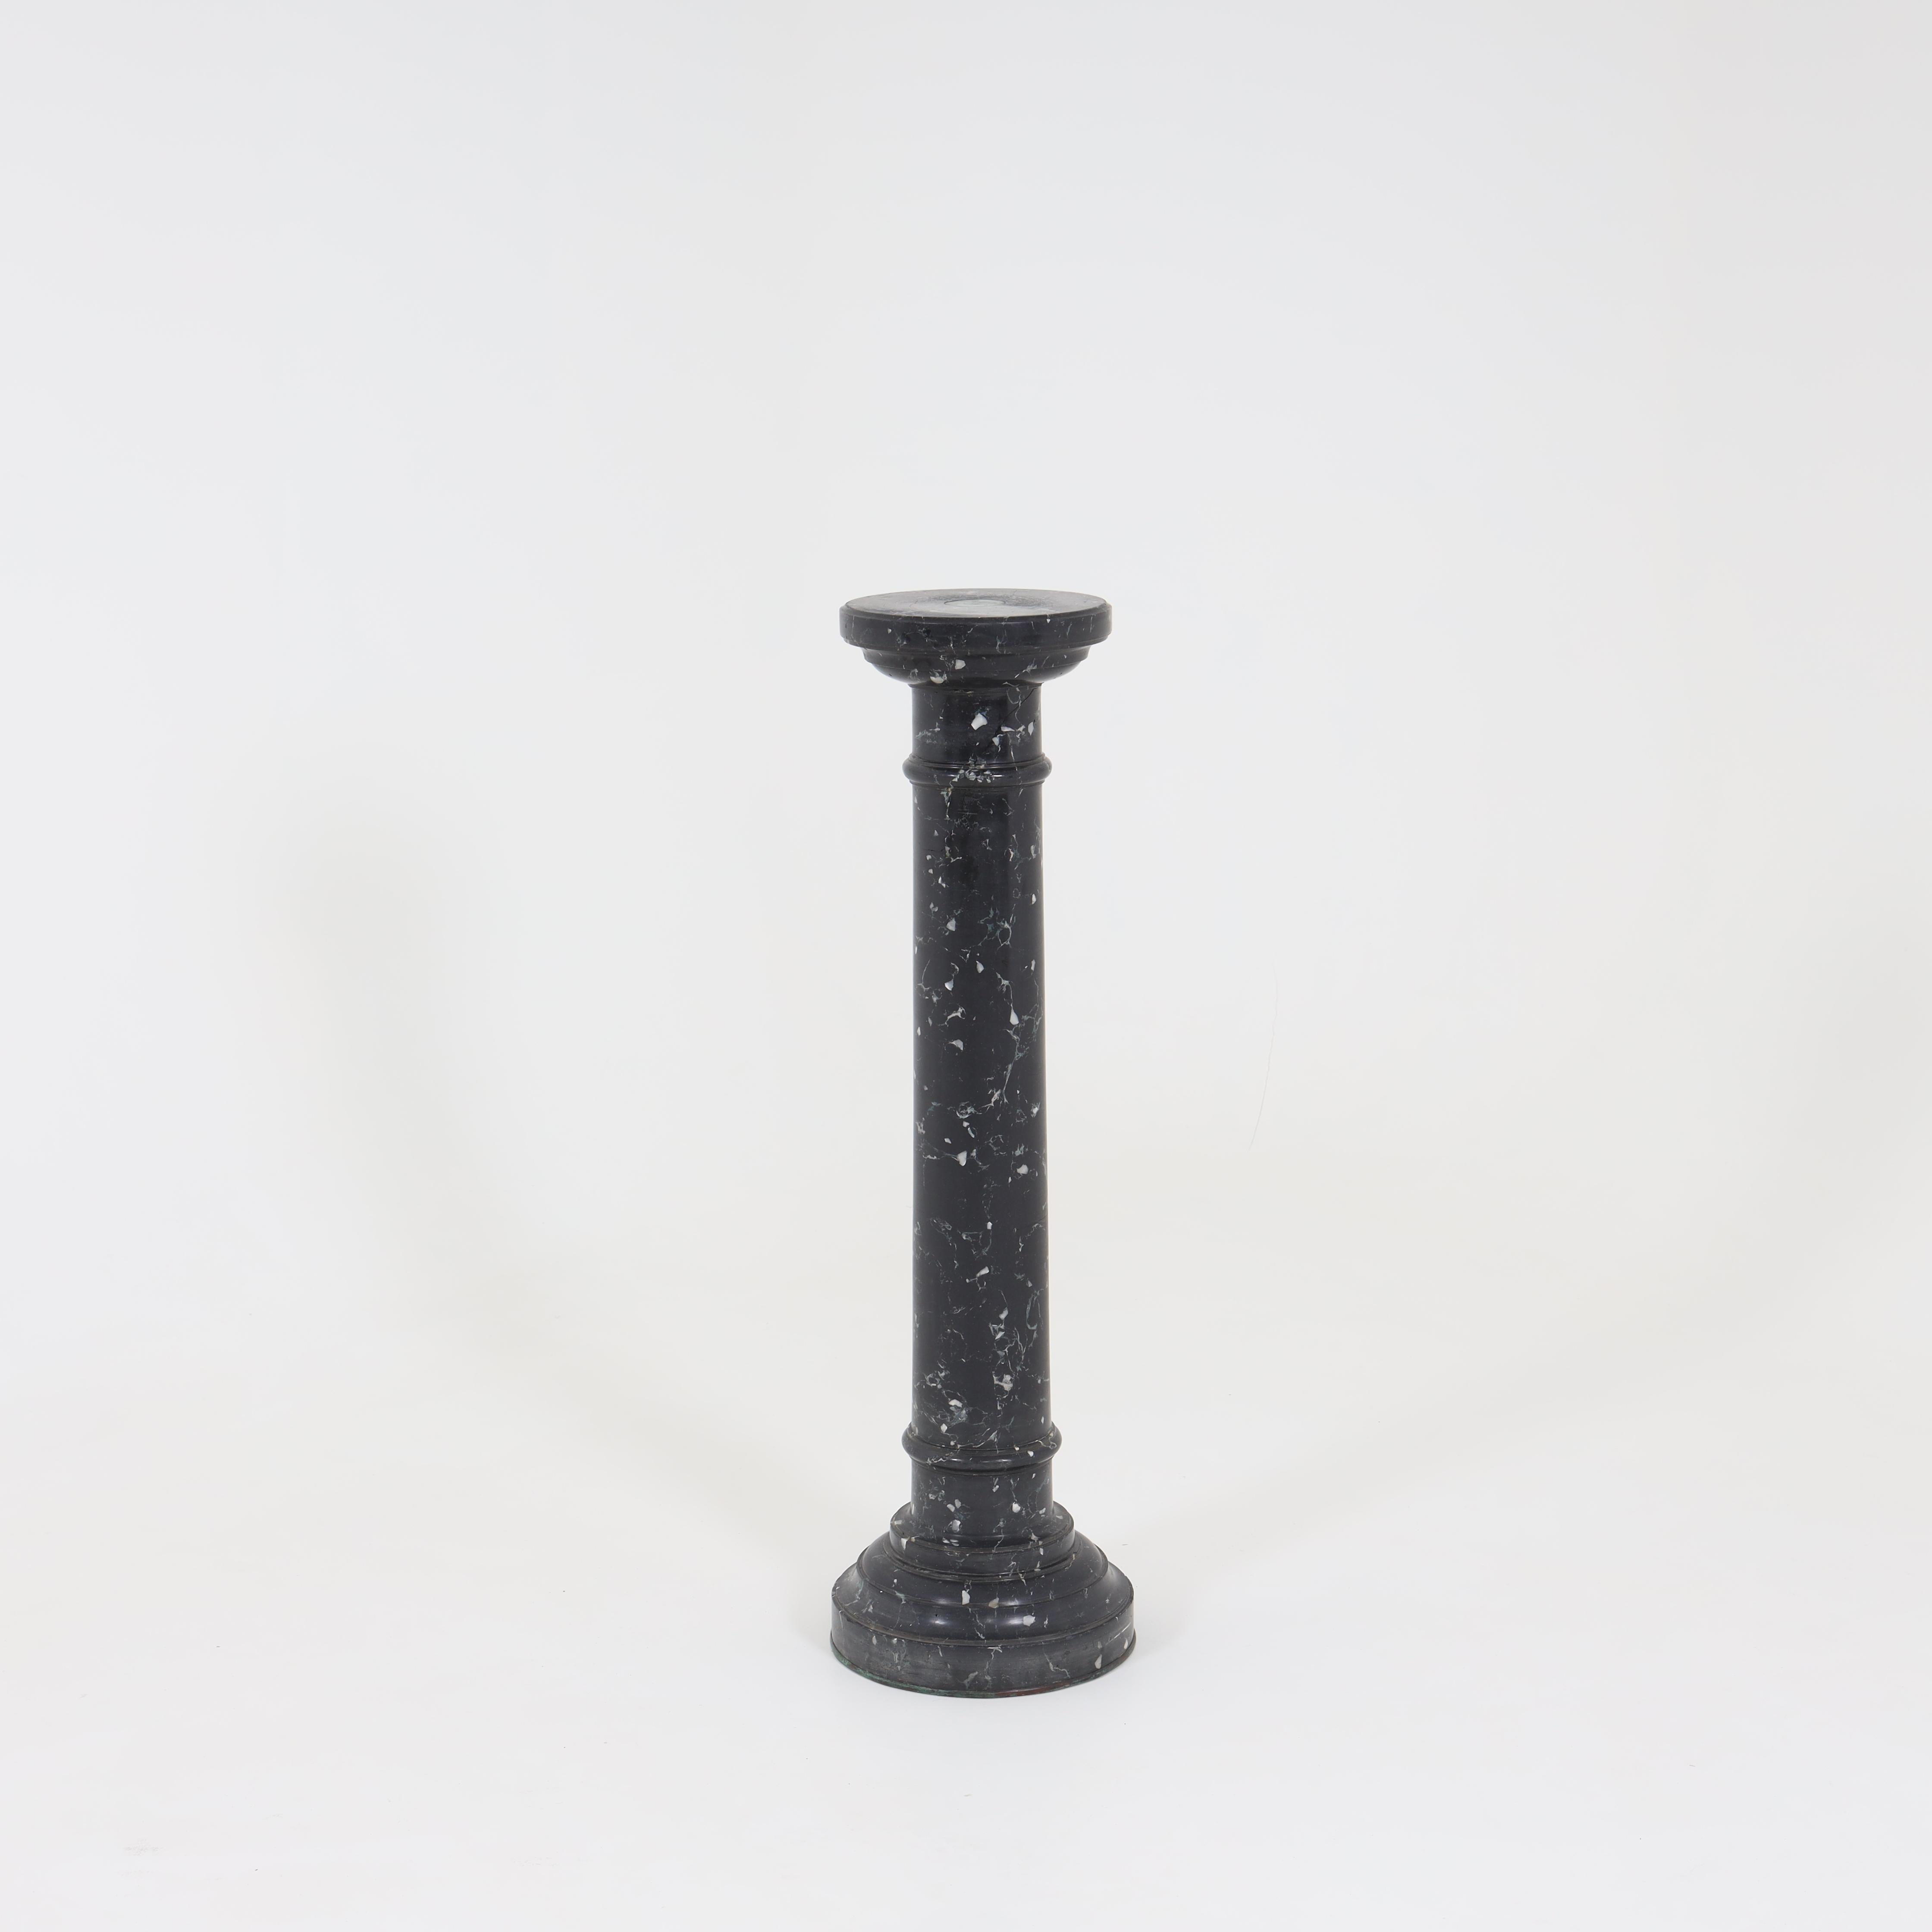 Column on profiled base and smooth shaft made of black and white marbled ceramic.